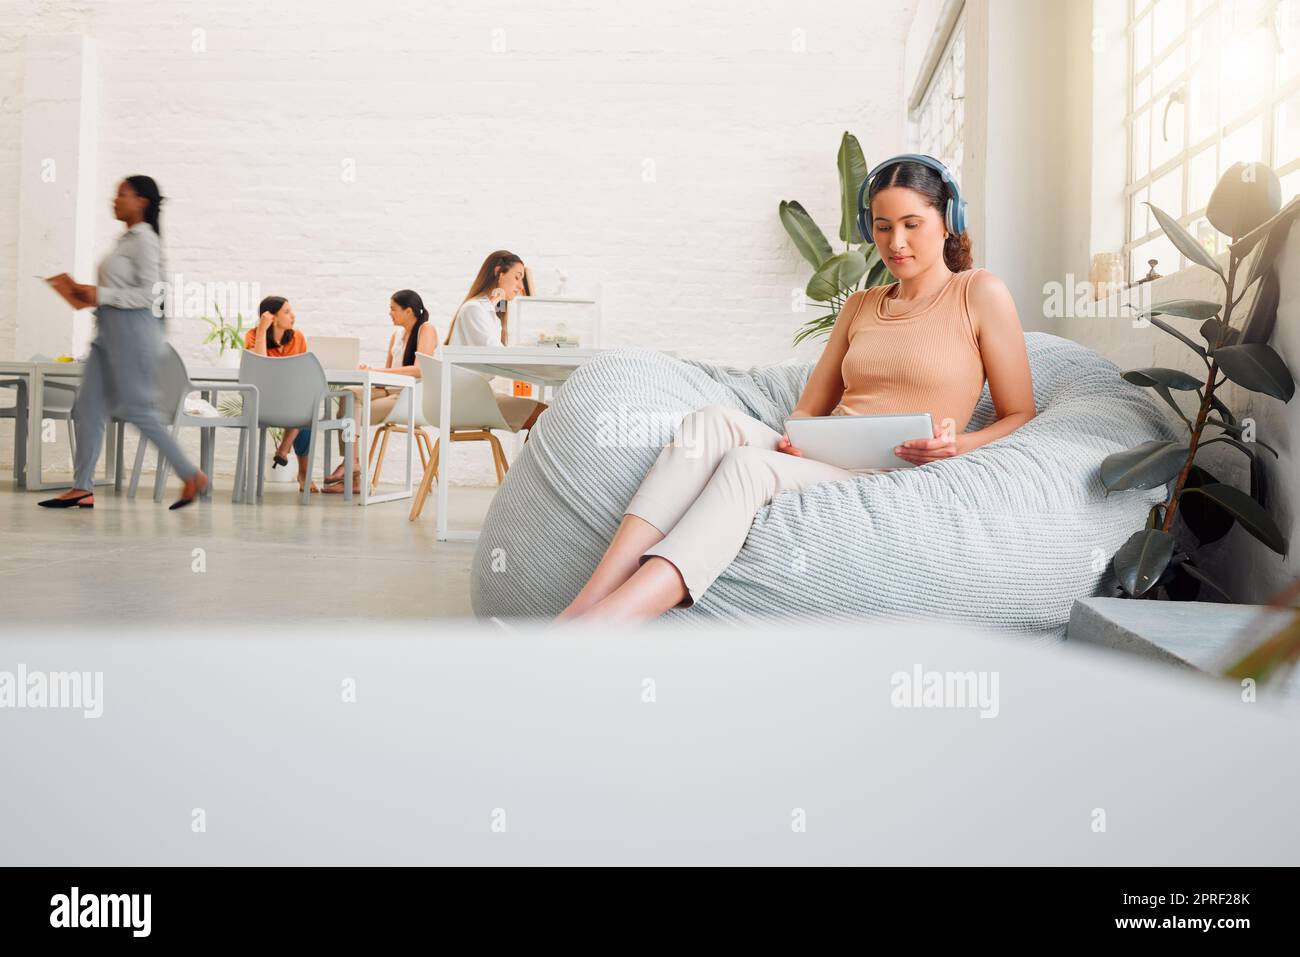 Creative intern browsing online with a tablet, listening to music on wireless headphones. Female on a break sitting on bean bags in a casual office space to improve creativity, work and mindfulness Stock Photo